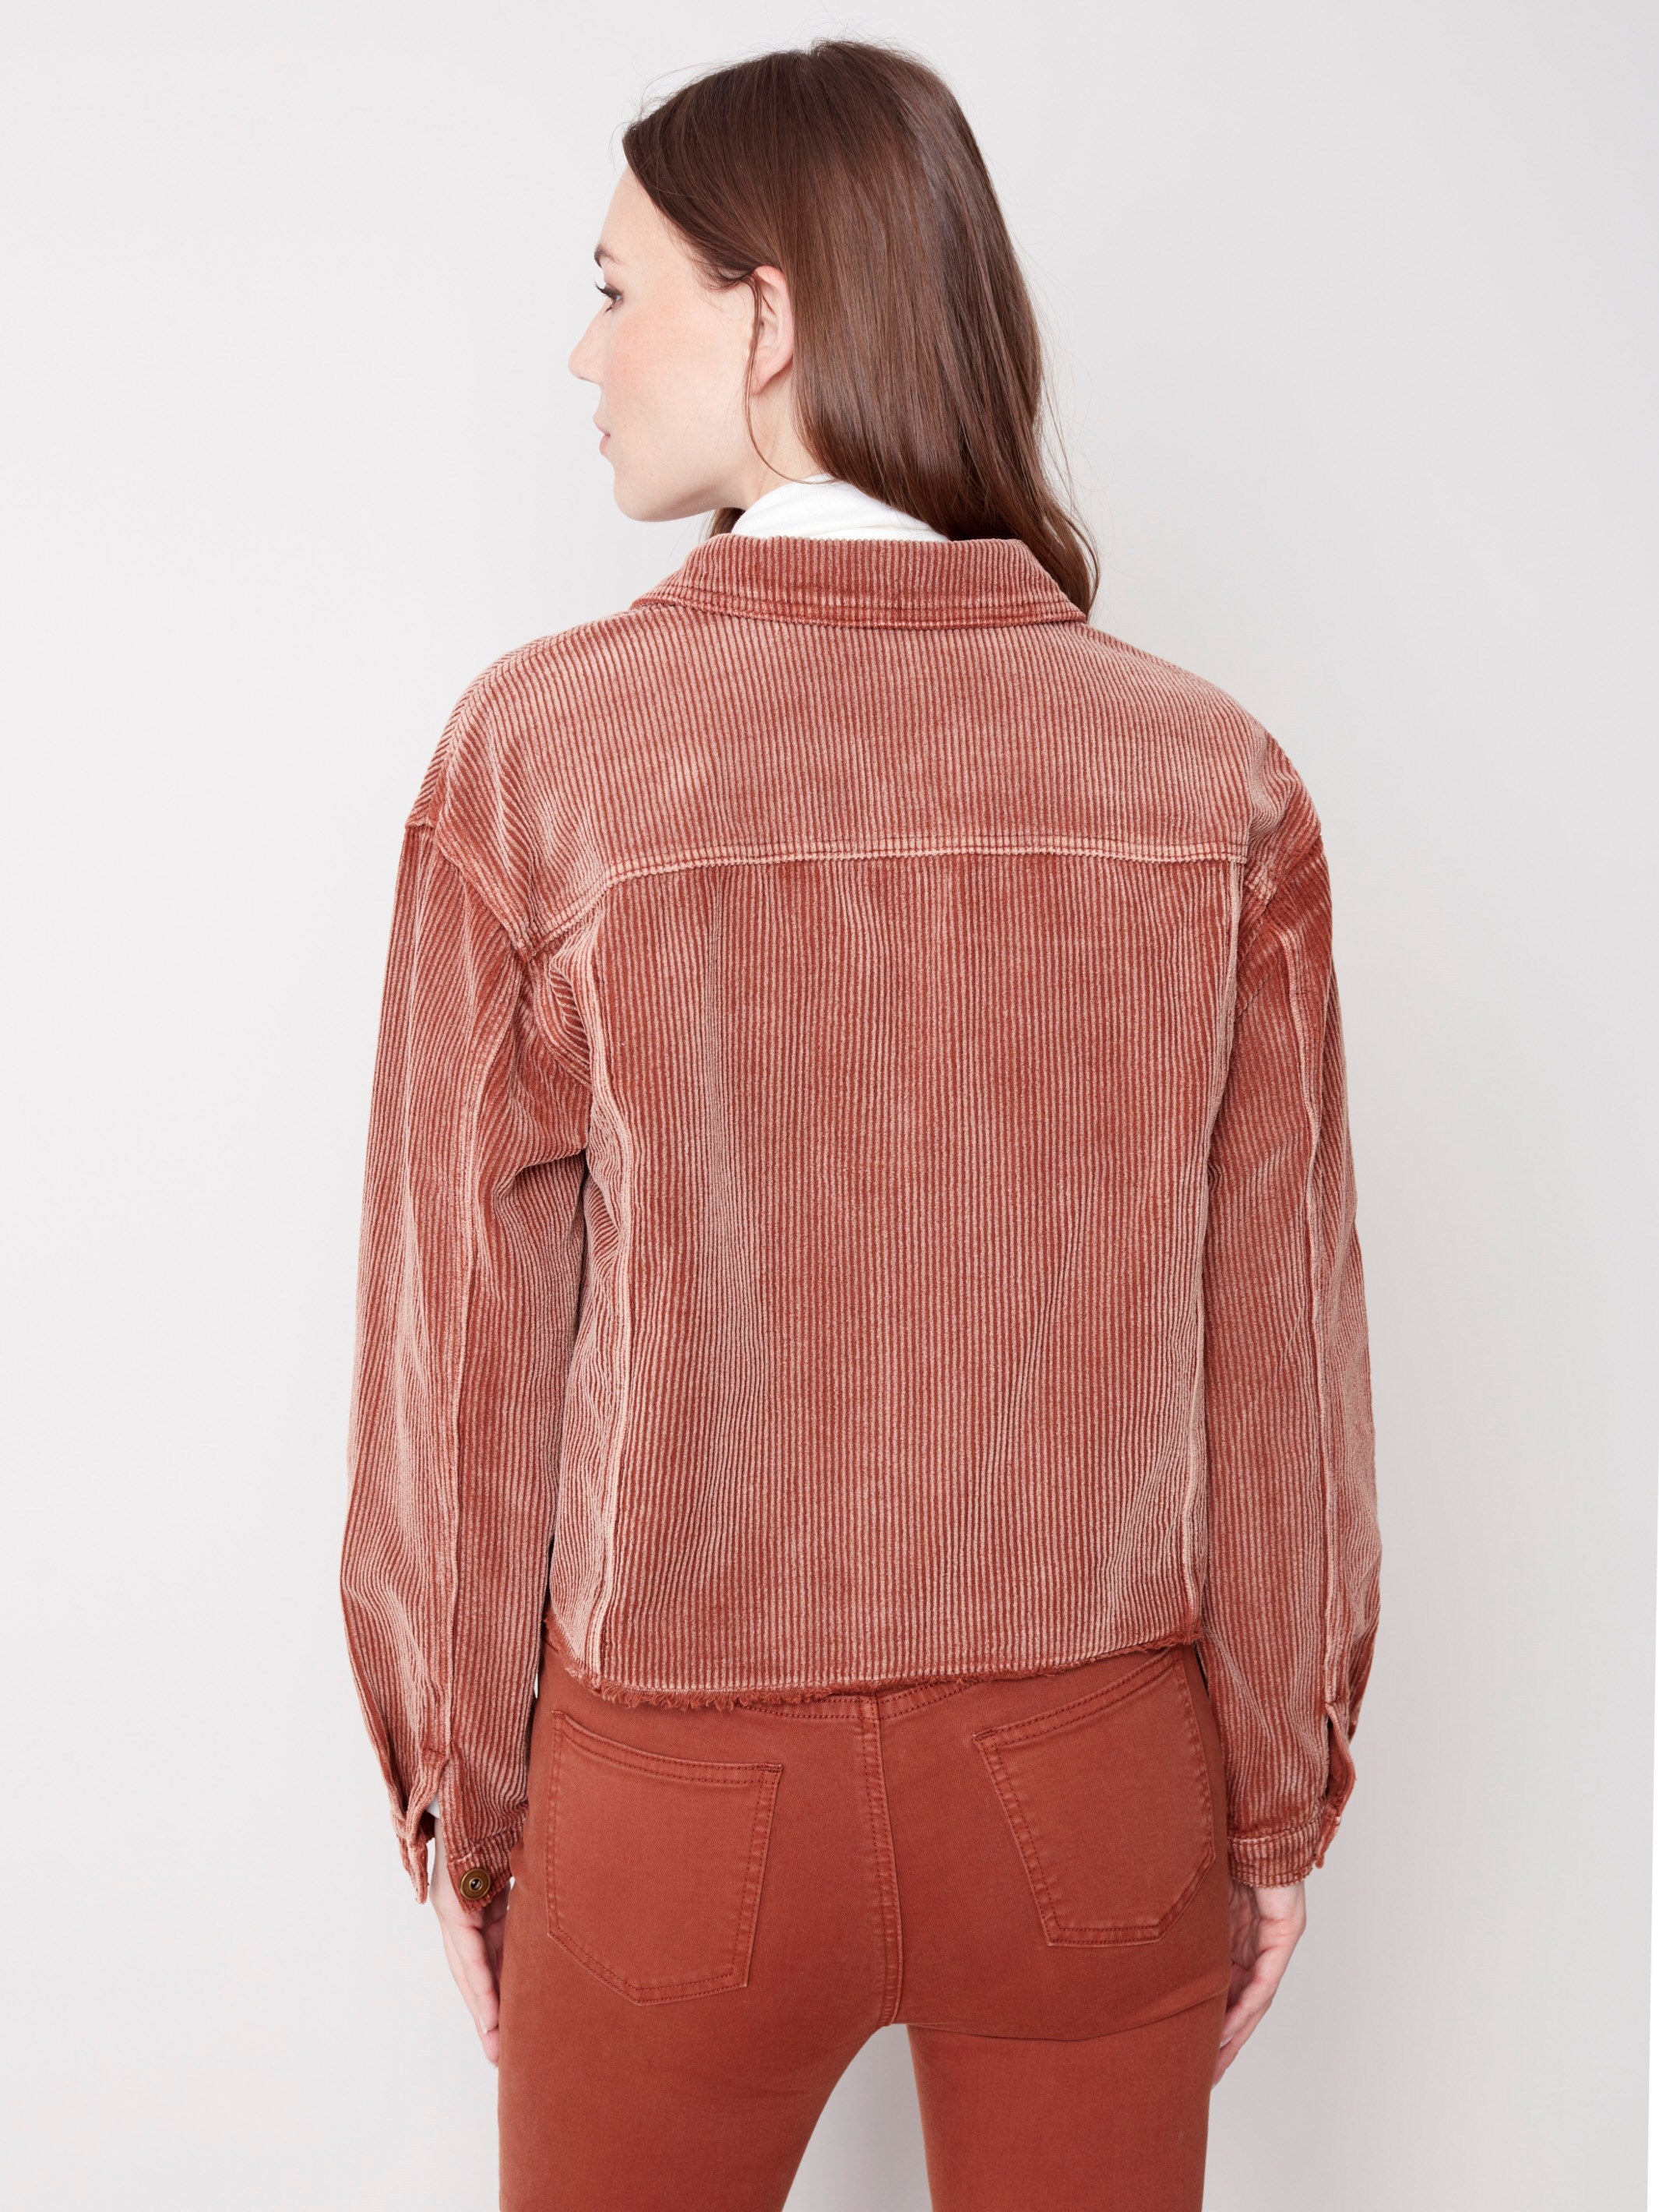 Washed-Out Corduroy Jacket - Cinnamon